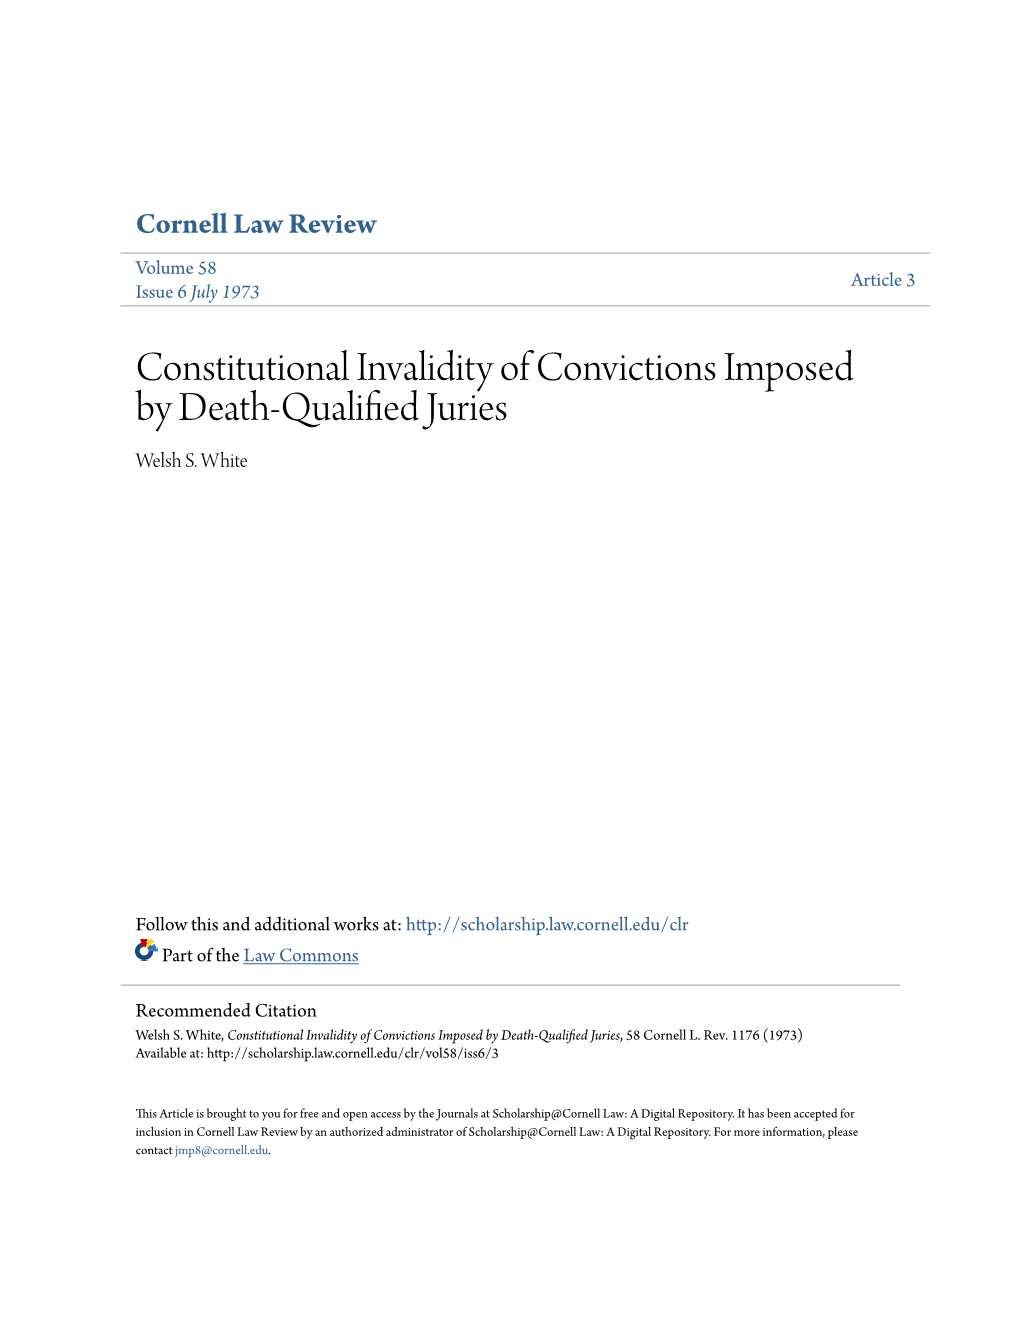 Constitutional Invalidity of Convictions Imposed by Death-Qualified Juries, 58 Cornell L